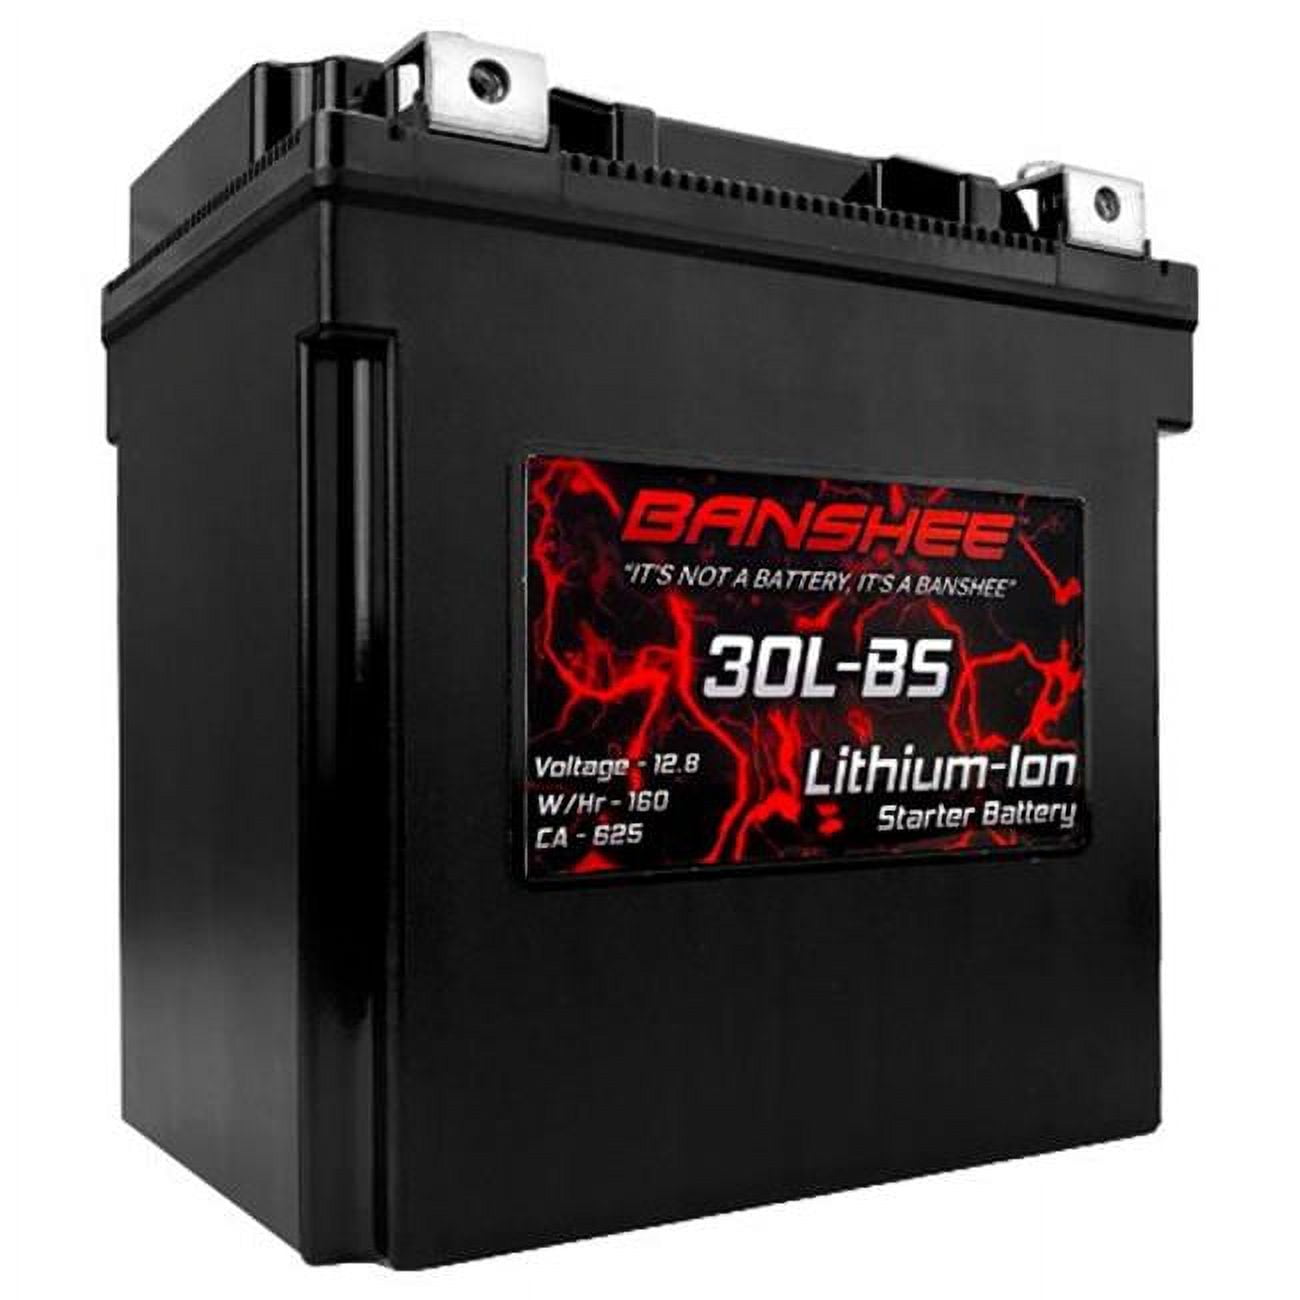 Picture of Banshee DLFP30L-BS-06 12.8V Lithium LiFePO4 Li CA Battery Harley for Replacement YTX30L-BS